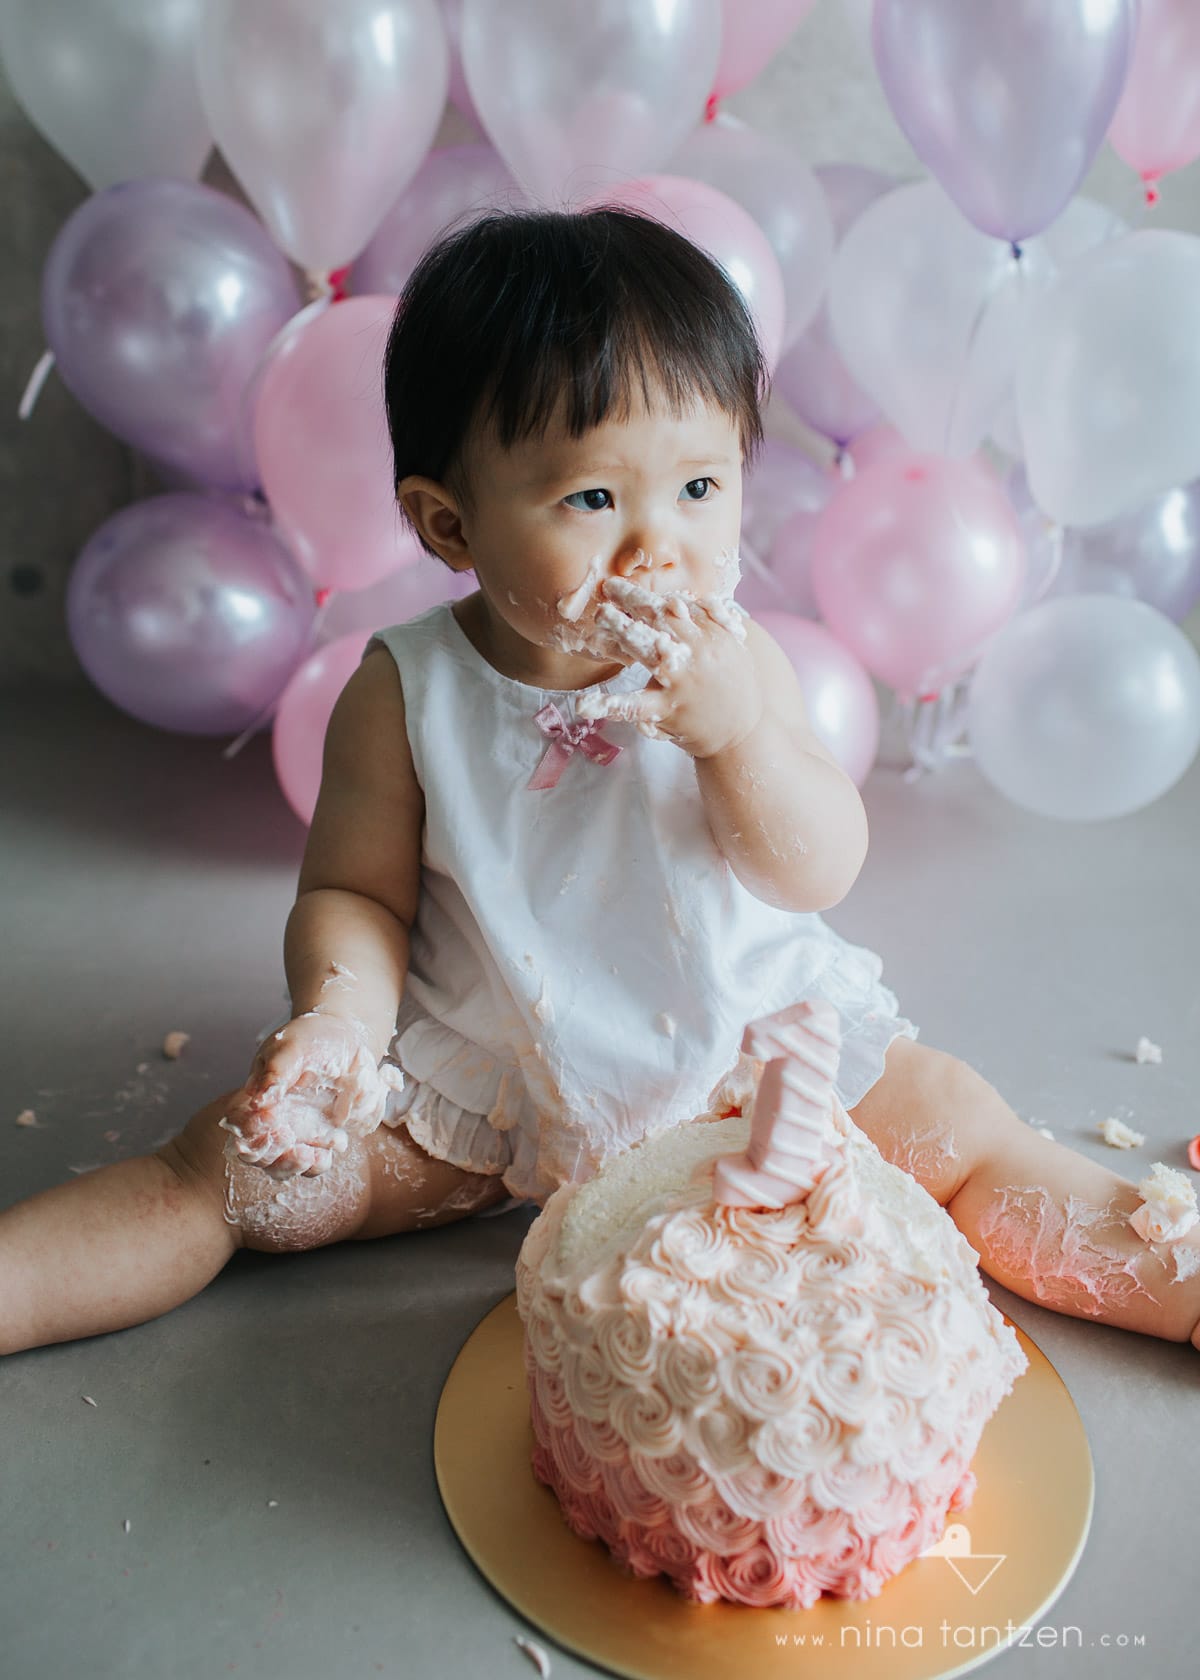 little girl digging into cake